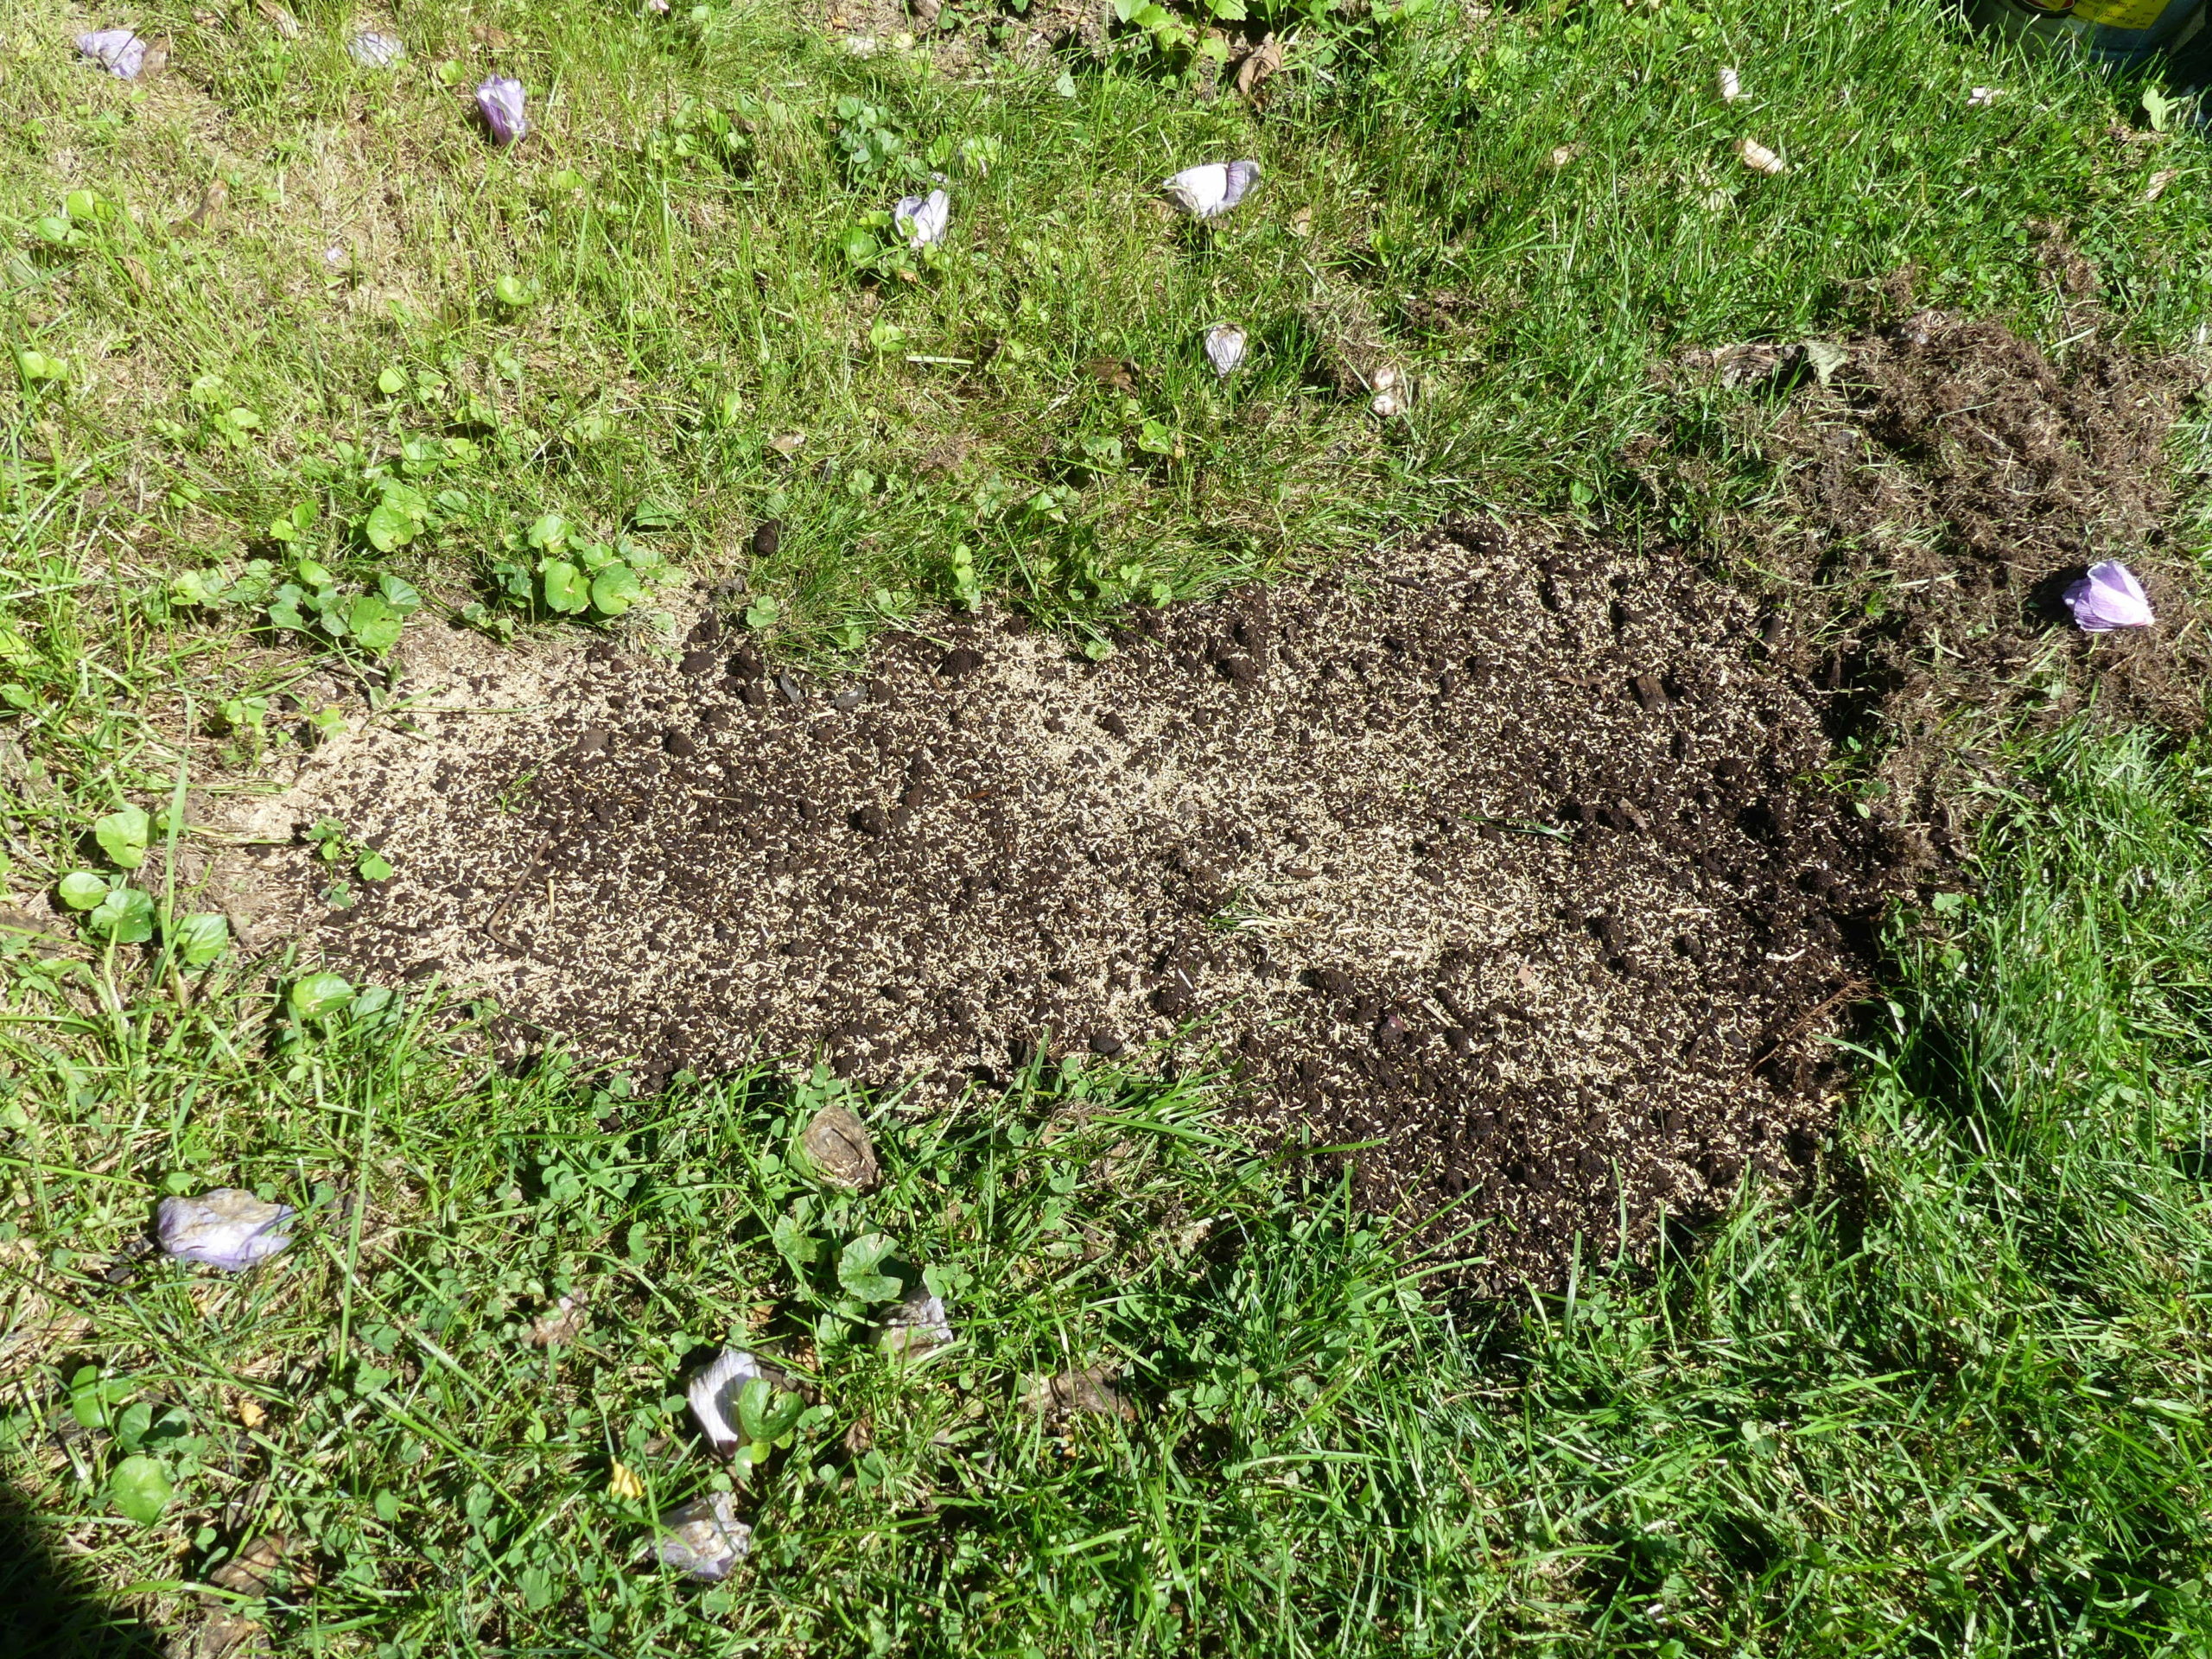 When the soil is level and smooth with no rocks, sticks or debris, it is overseeded by hand so there are about 10 seeds per square inch blending the seed at the edges.